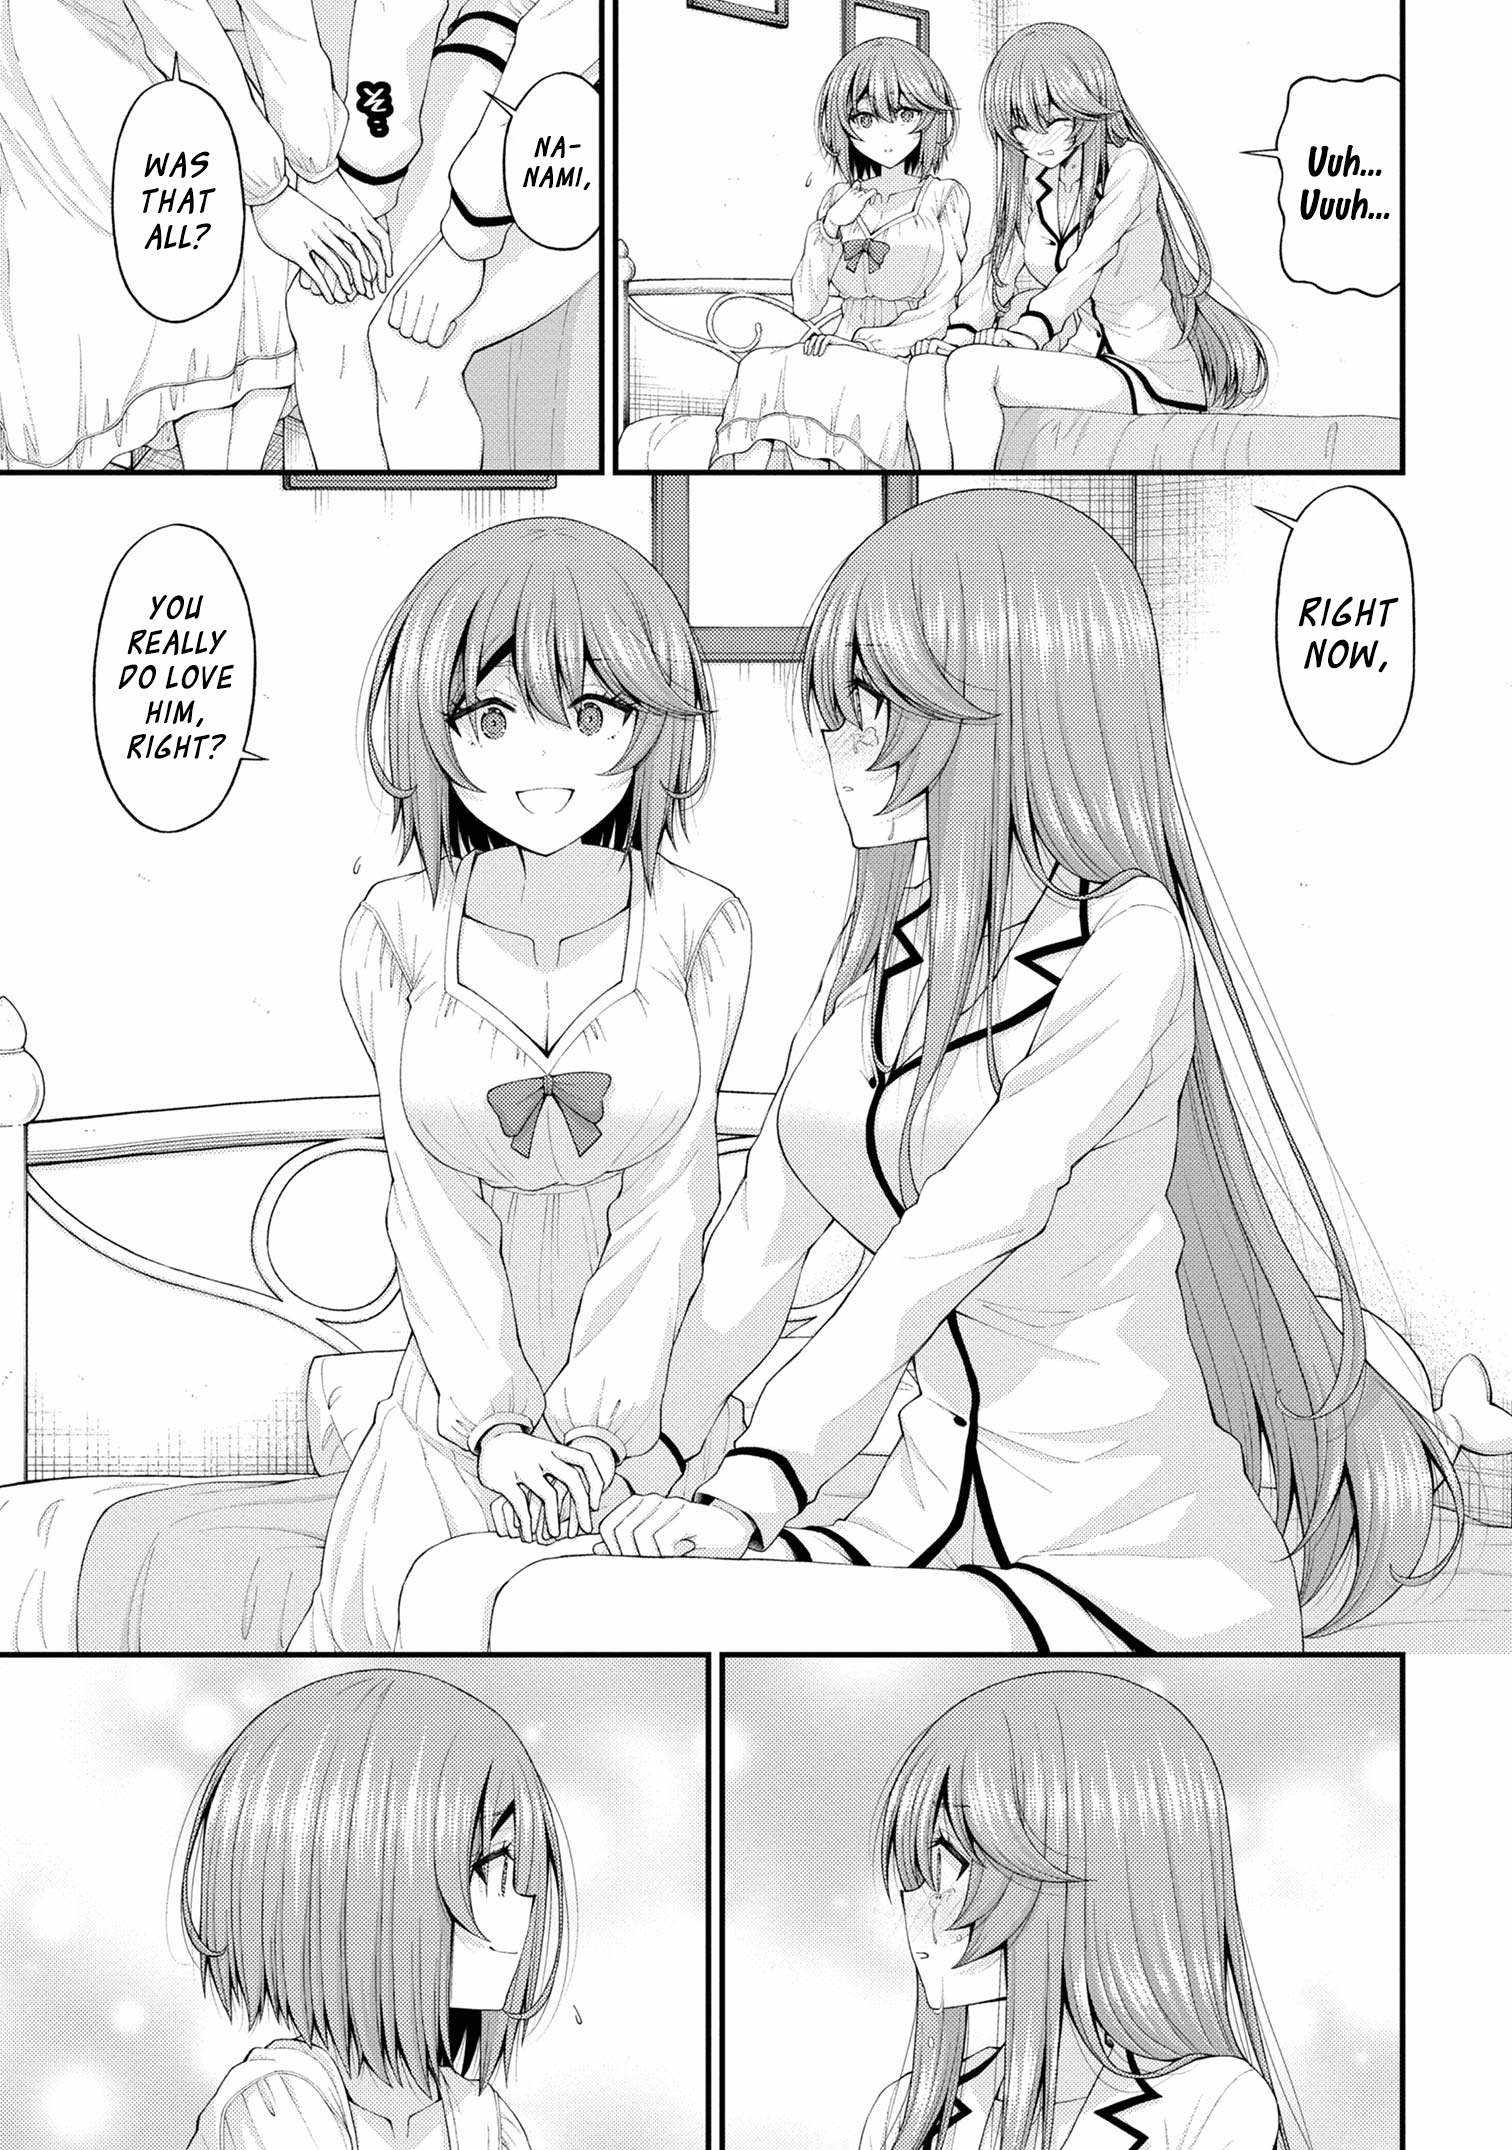 The Gal Who Was Meant to Confess to Me as a Game Punishment Has Apparently Fallen in Love with Me Chapter 12-5-eng-li - Page 18